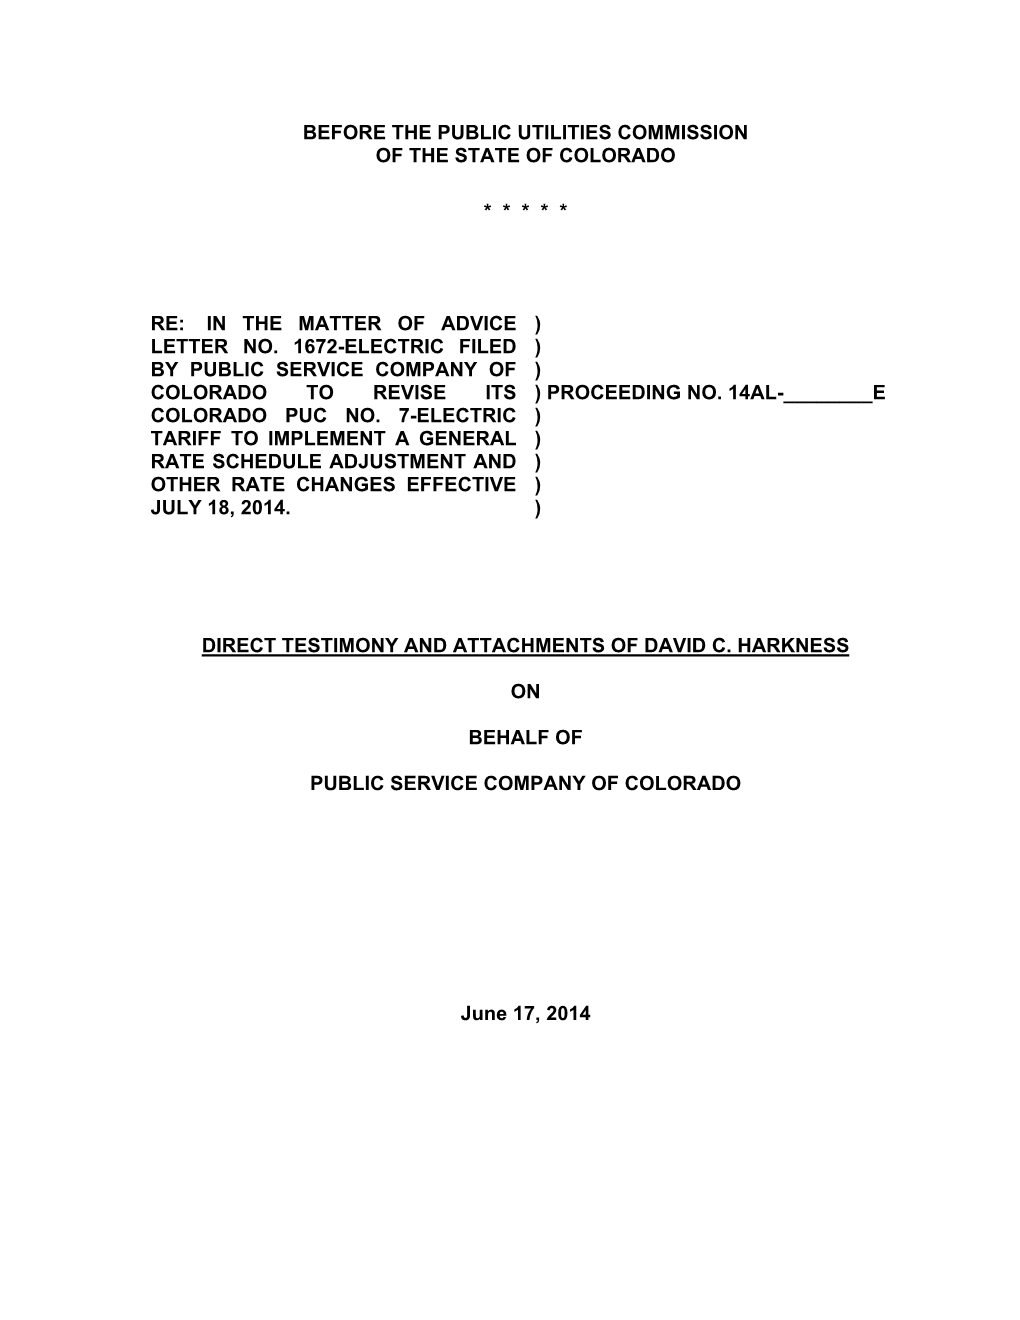 Before the Public Utilities Commission of the State of Colorado